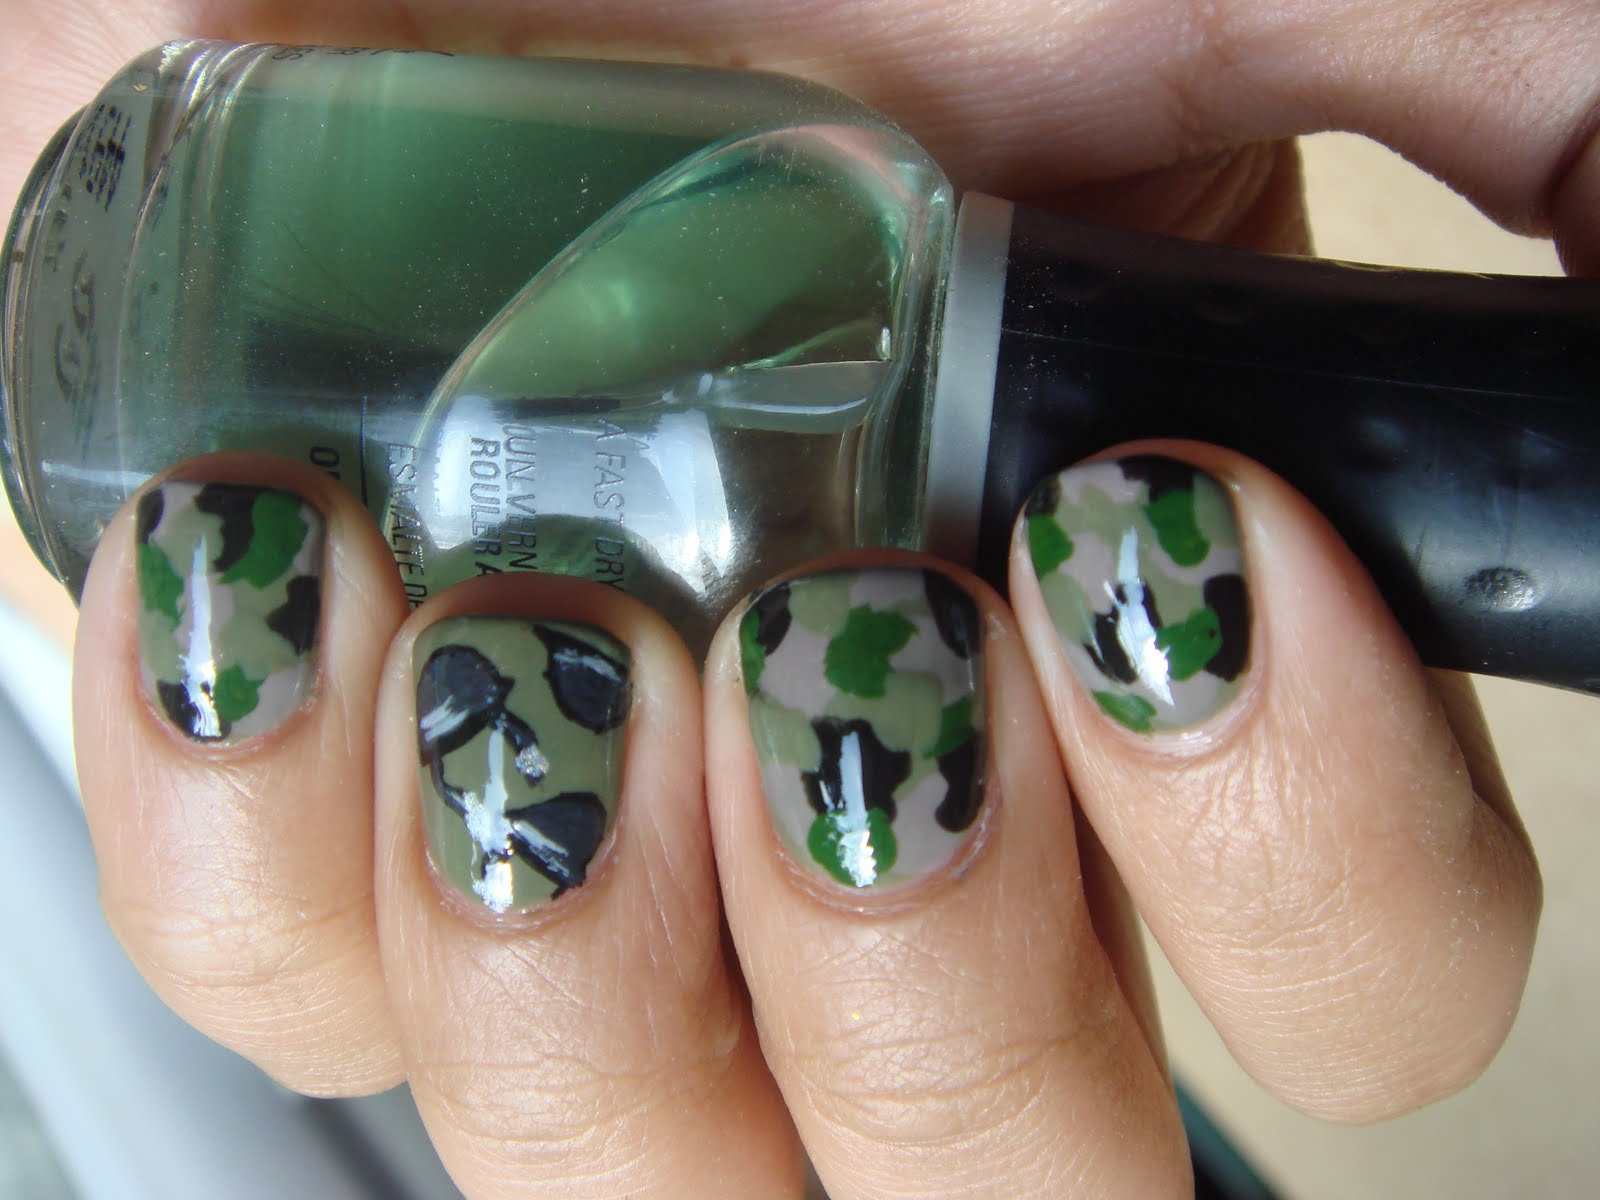 Acceptable Nail Colors for Military Personnel - wide 7